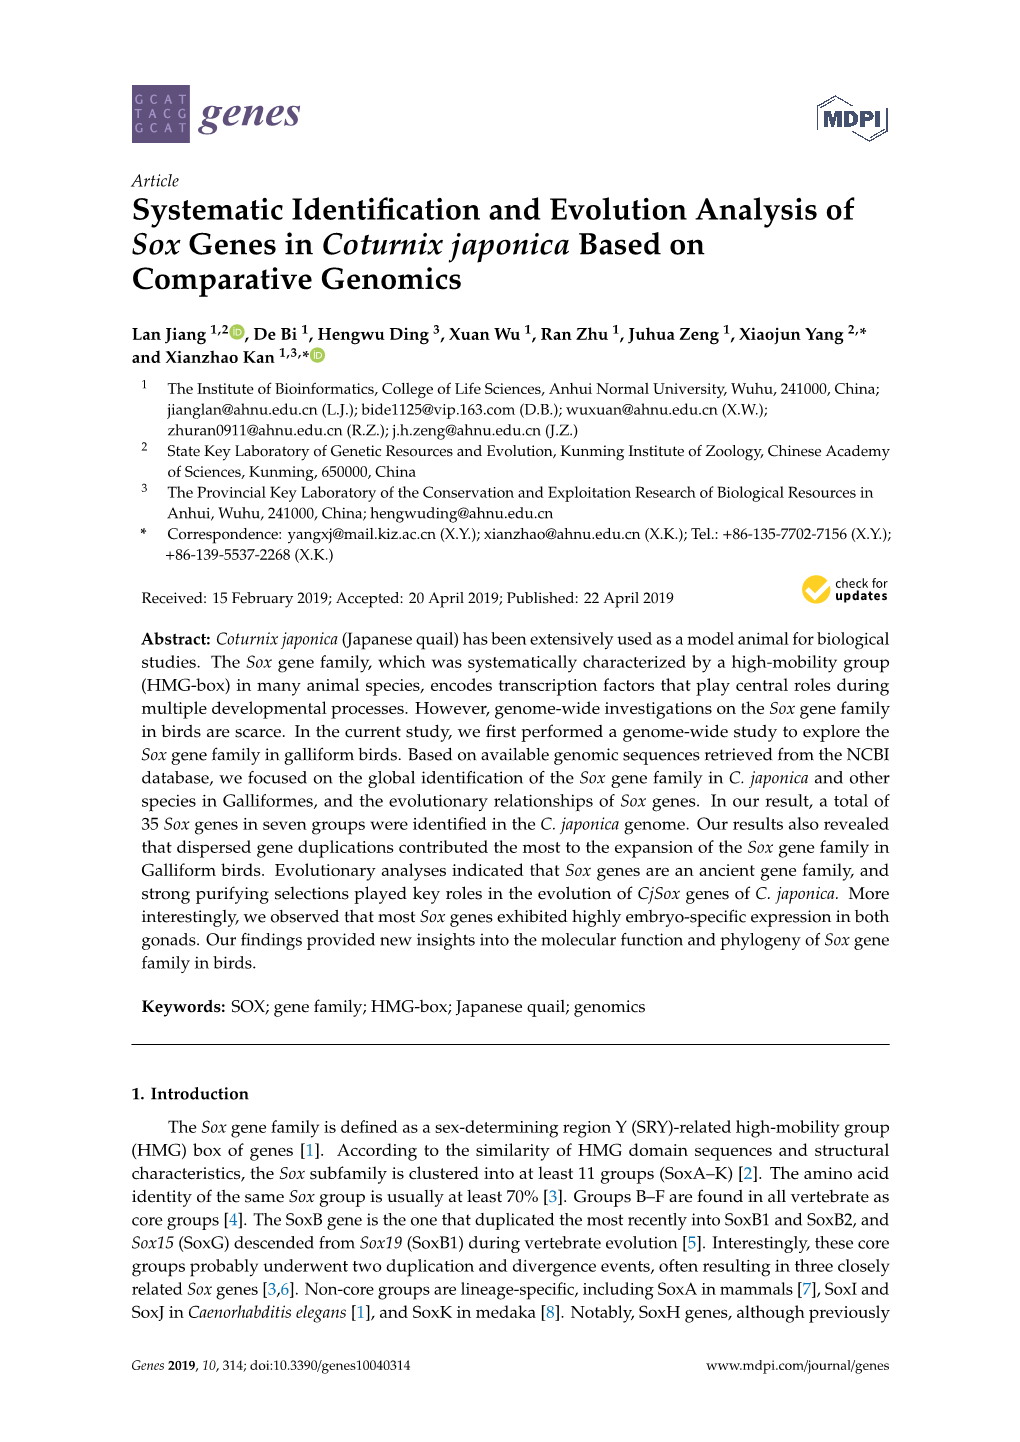 Systematic Identification and Evolution Analysis of Sox Genes in Coturnix Japonica Based on Comparative Genomics